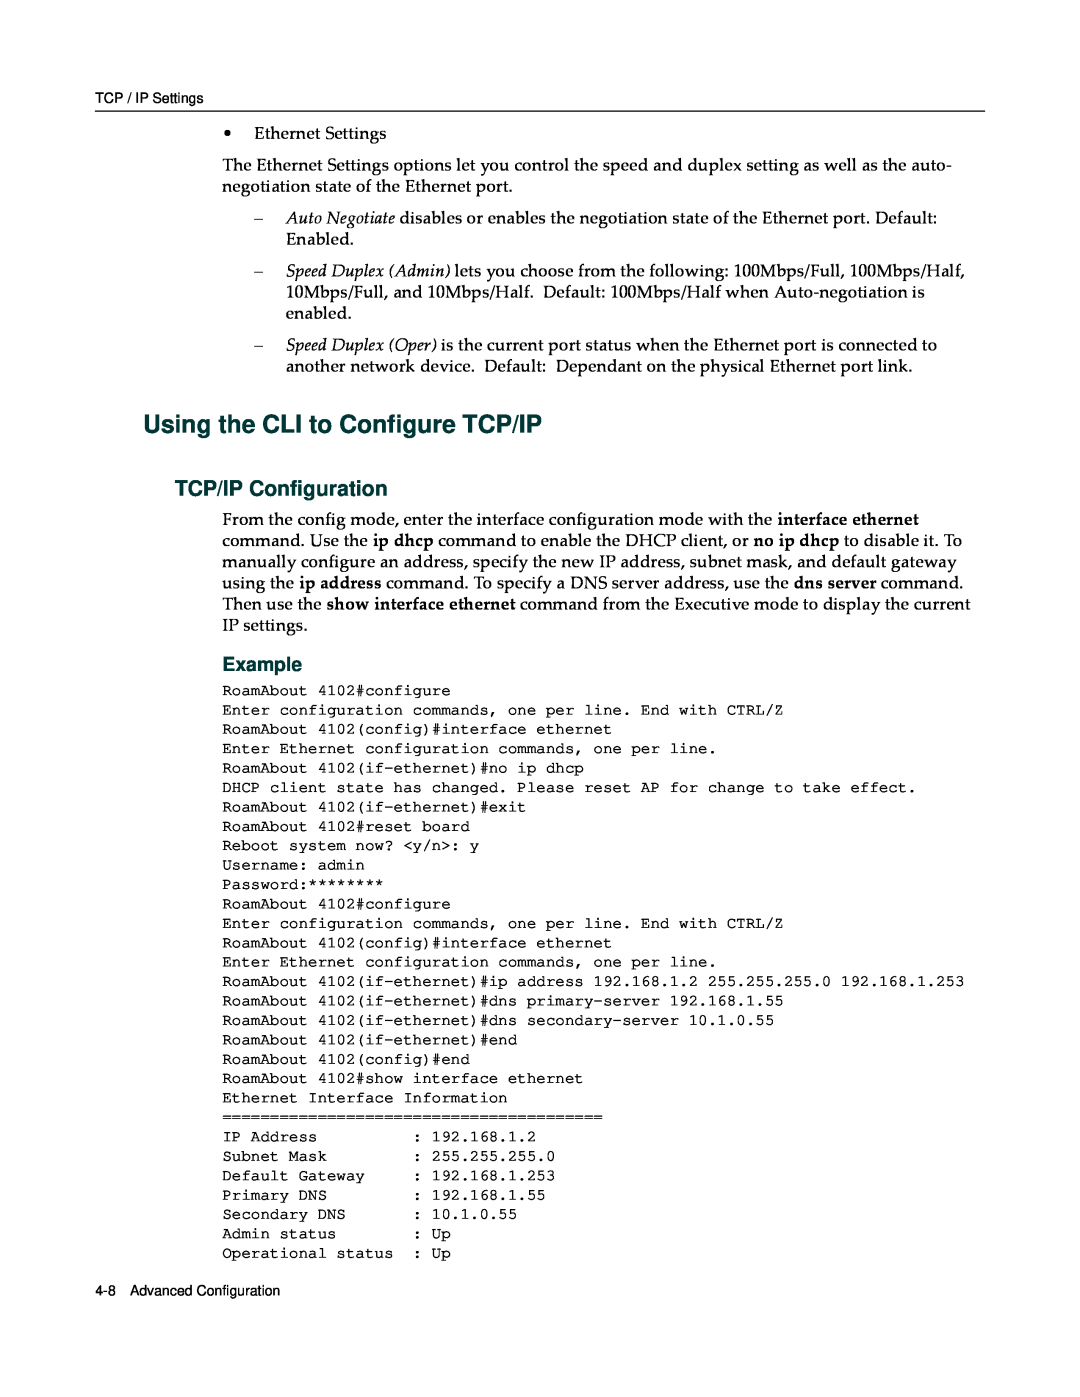 Enterasys Networks RBT-4102 manual Using the CLI to Configure TCP/IP, TCP/IP Configuration, Example 